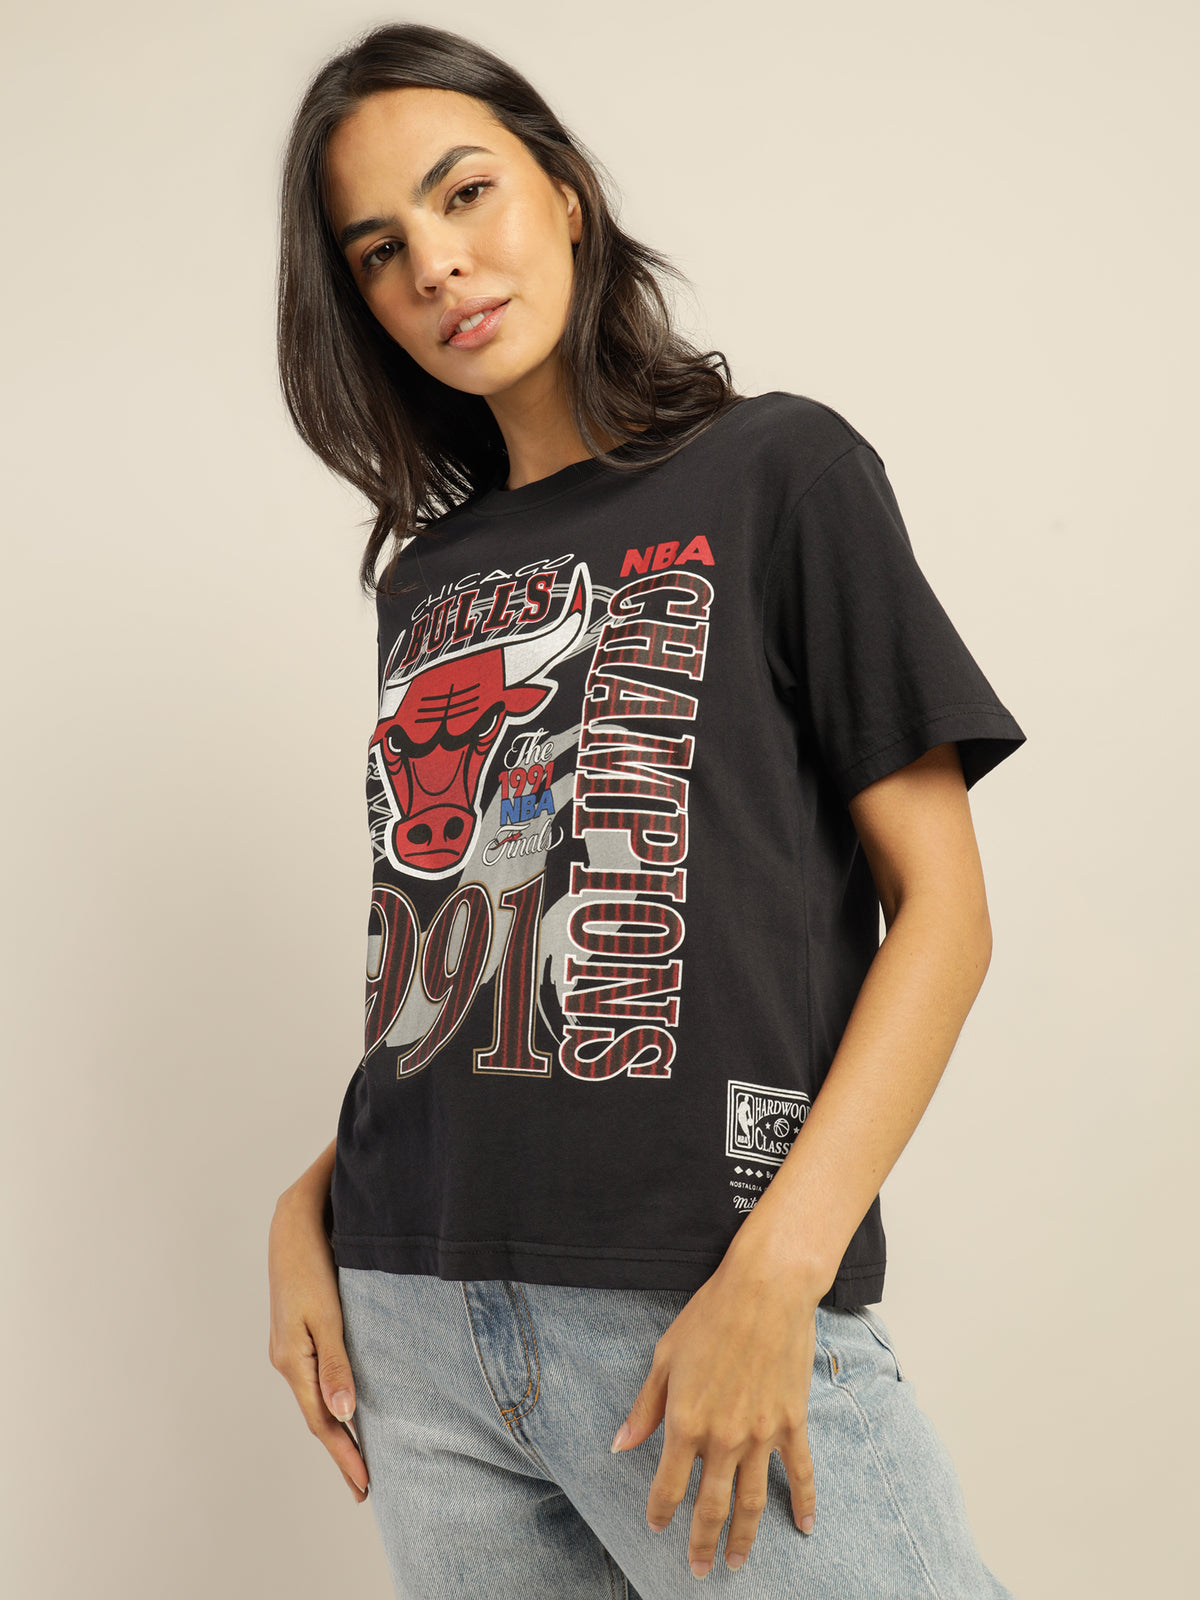 Vintage Chicago Bulls 91 Finals T-Shirt in Faded Black